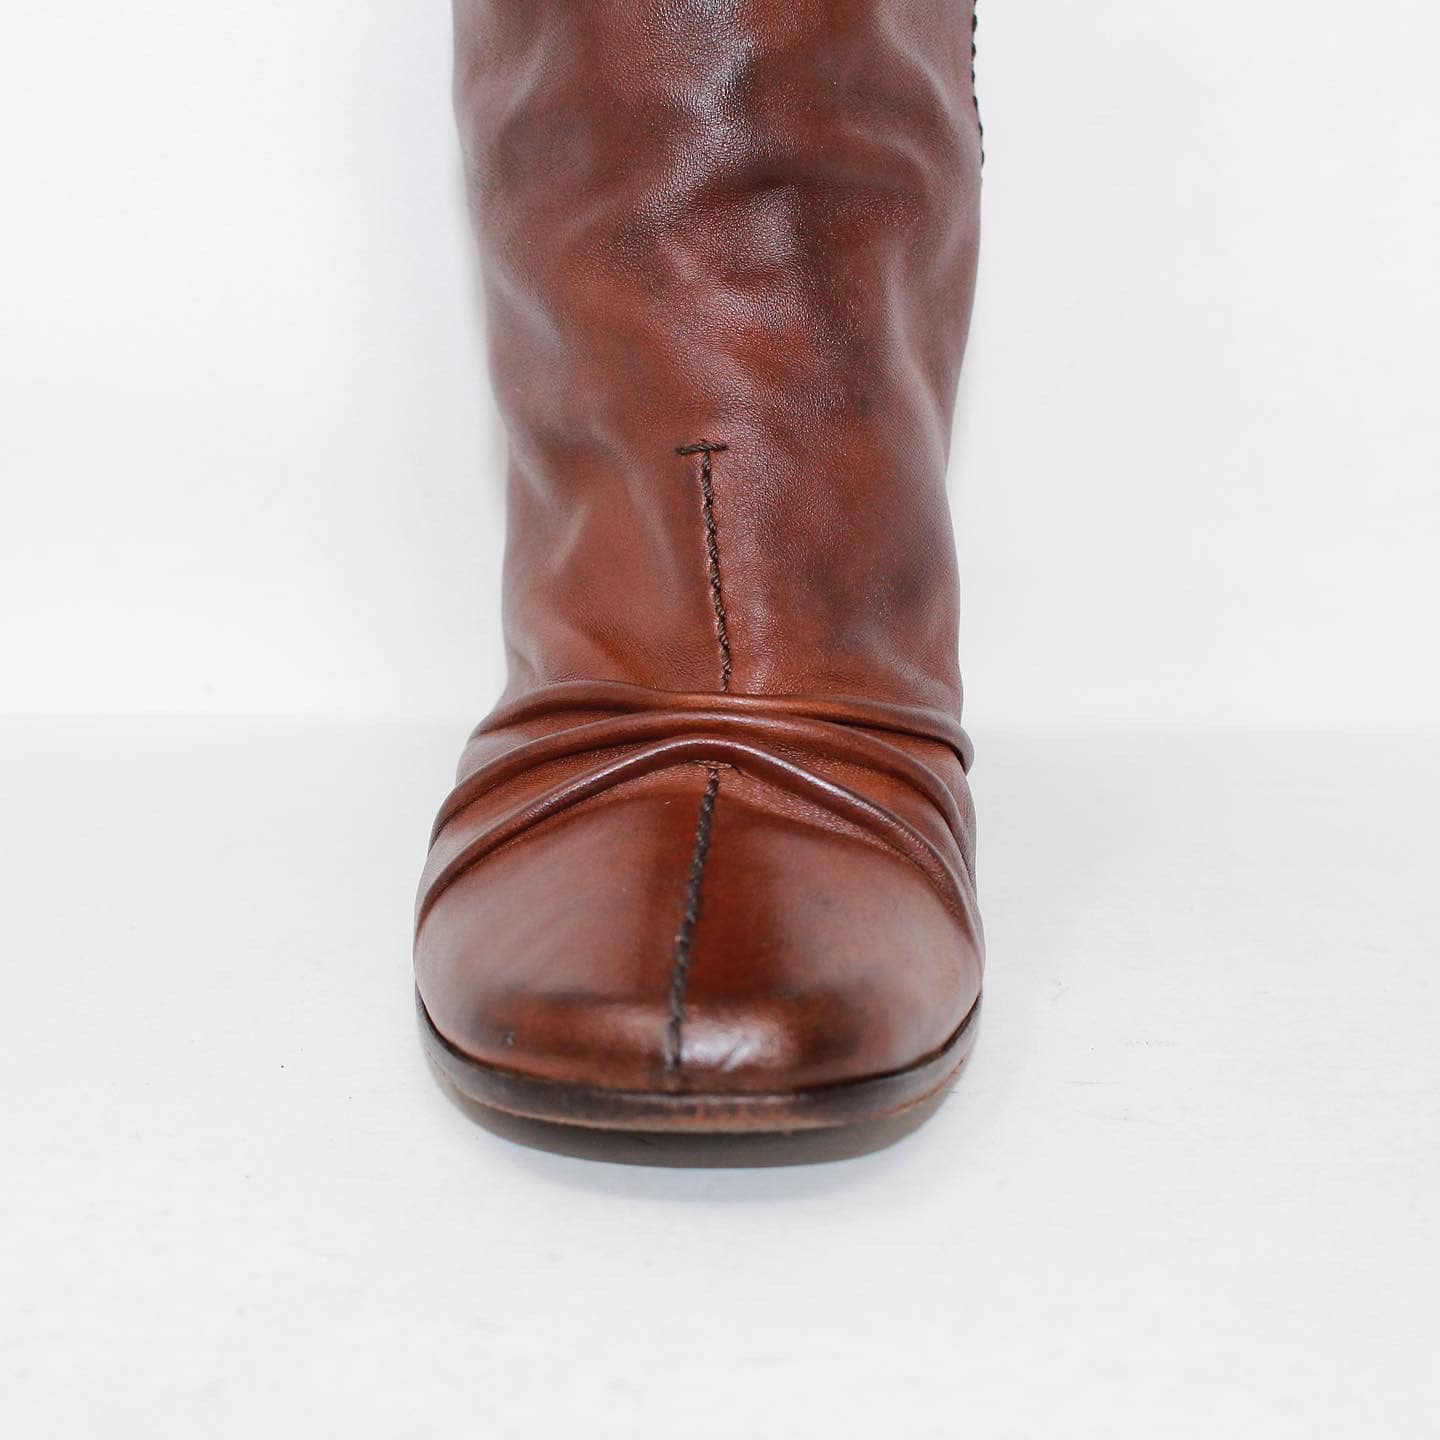 LOUIS VUITTON #39994 Vintage Brown Leather Heeled Boots (US 5.5 EU 35.5) –  ALL YOUR BLISS